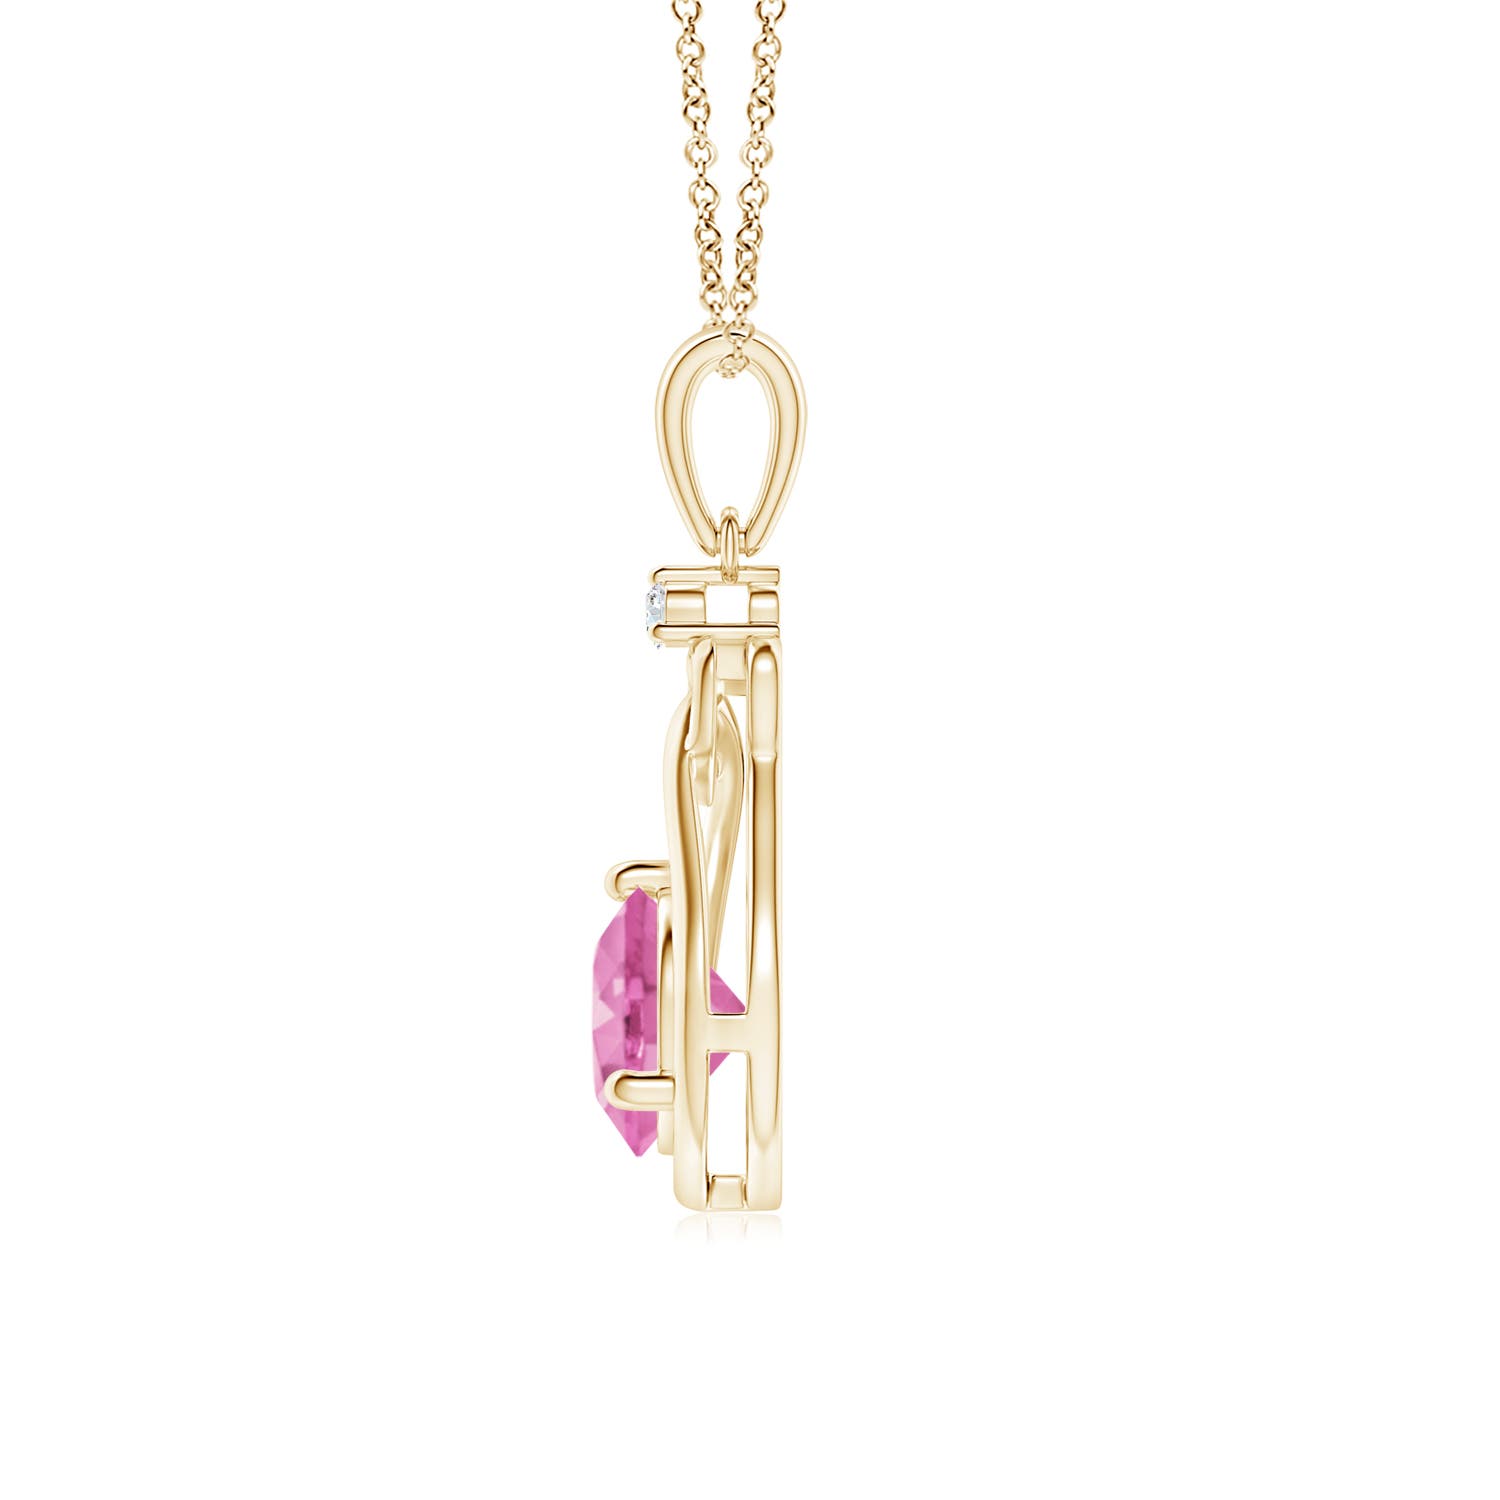 AA - Pink Sapphire / 1.01 CT / 14 KT Yellow Gold